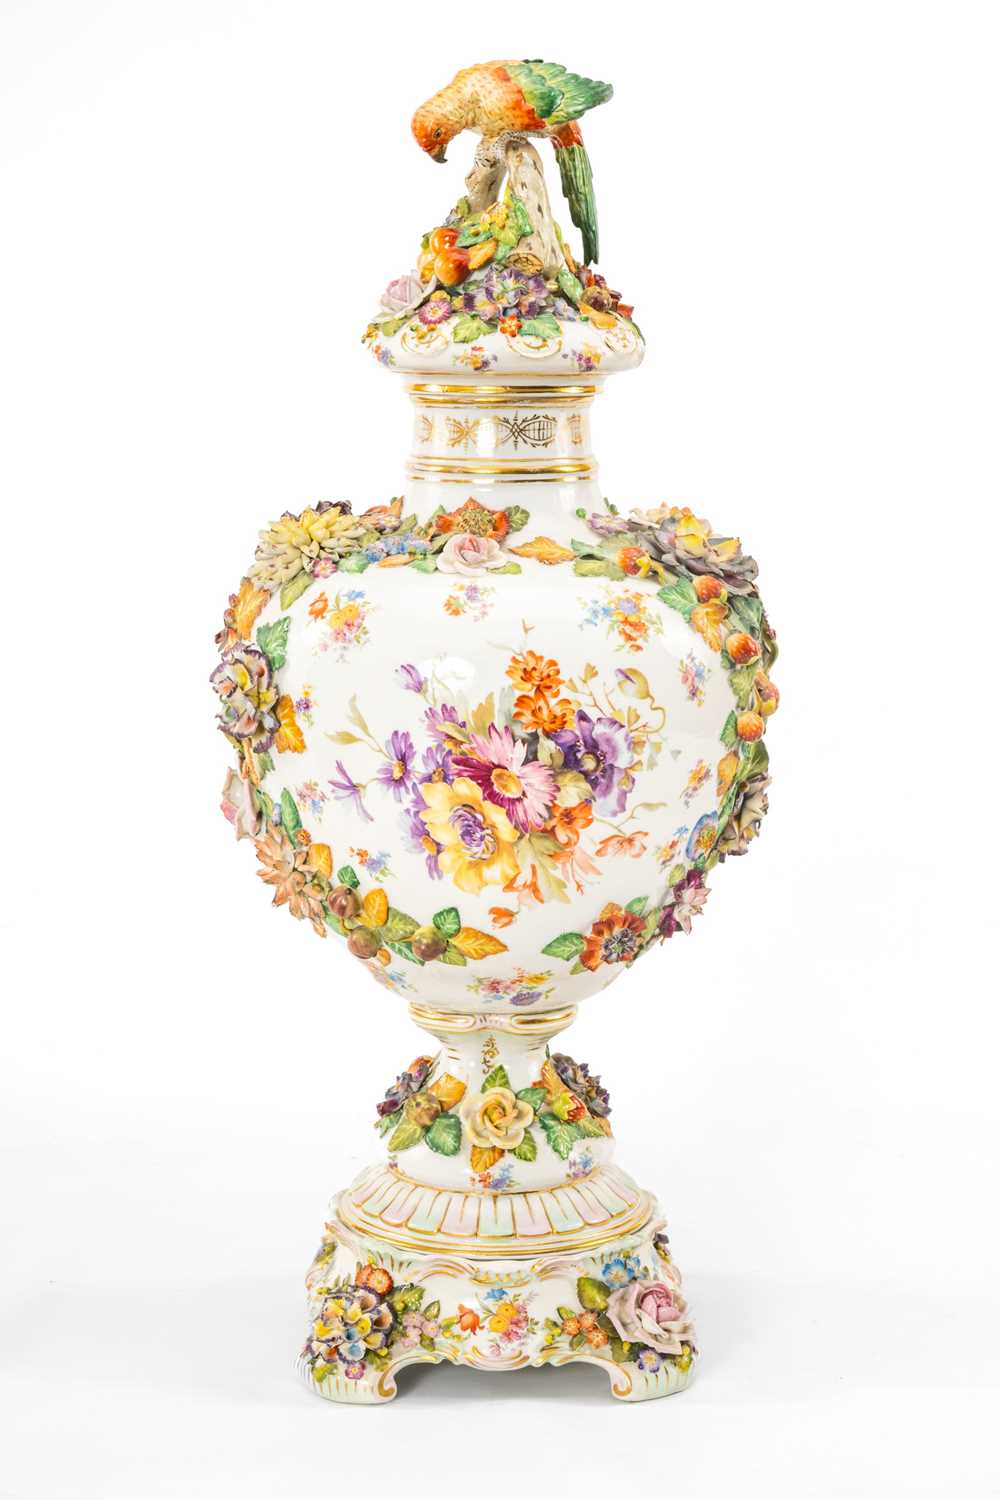 LARGE SITZENDORF PORCELAIN VASE, COVER & STAND, 19th Century, printed with vignettes of flowers